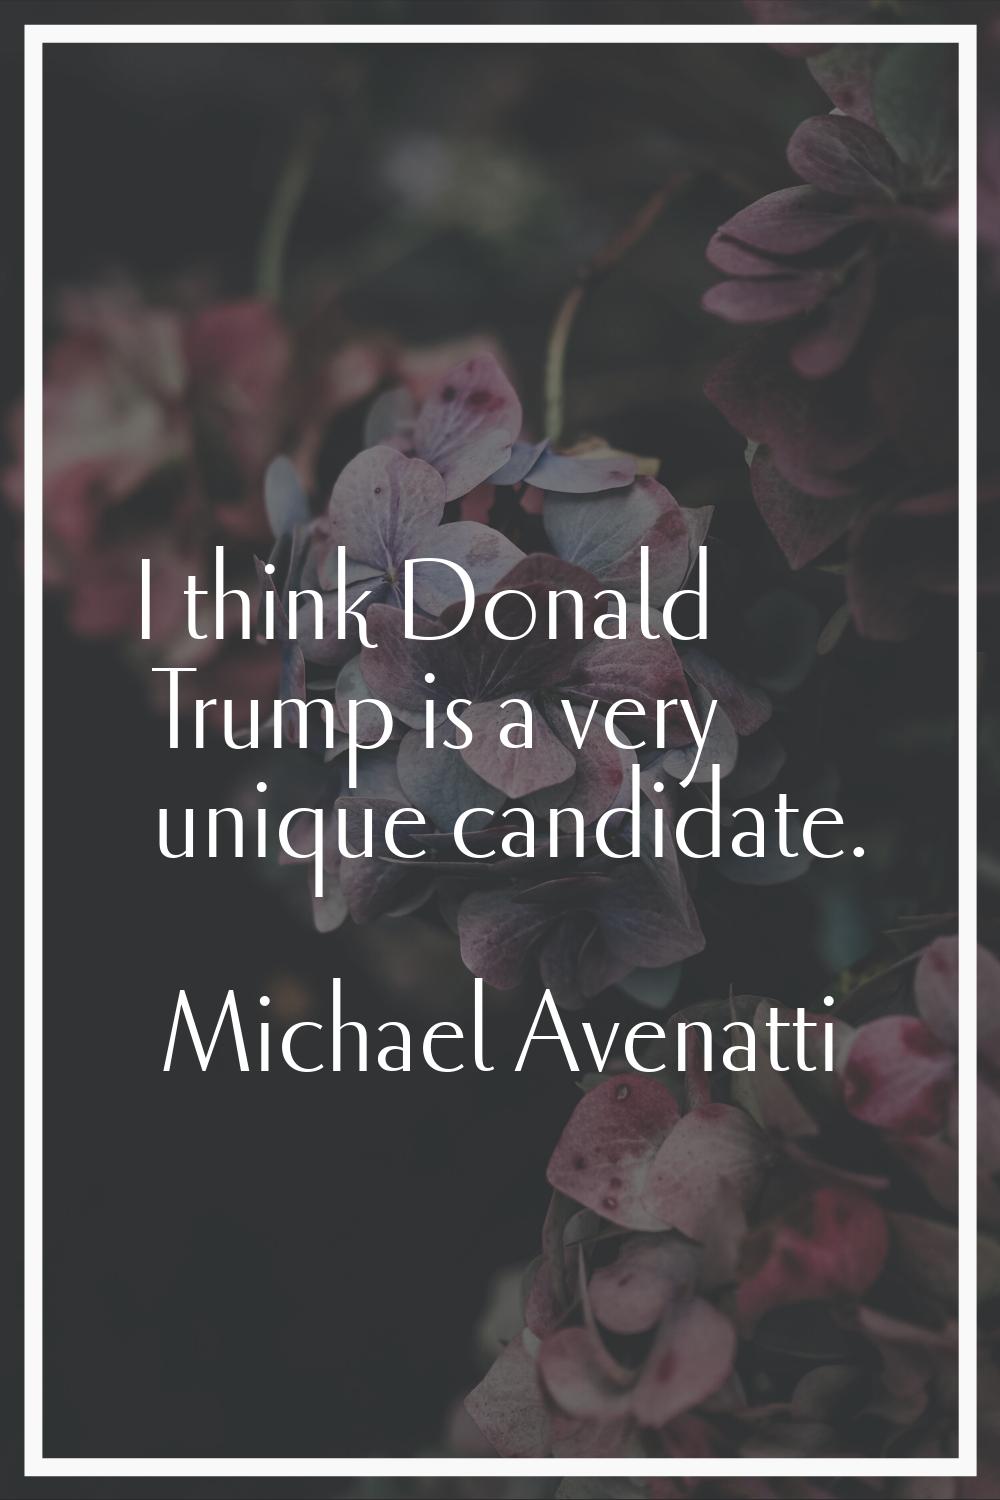 I think Donald Trump is a very unique candidate.